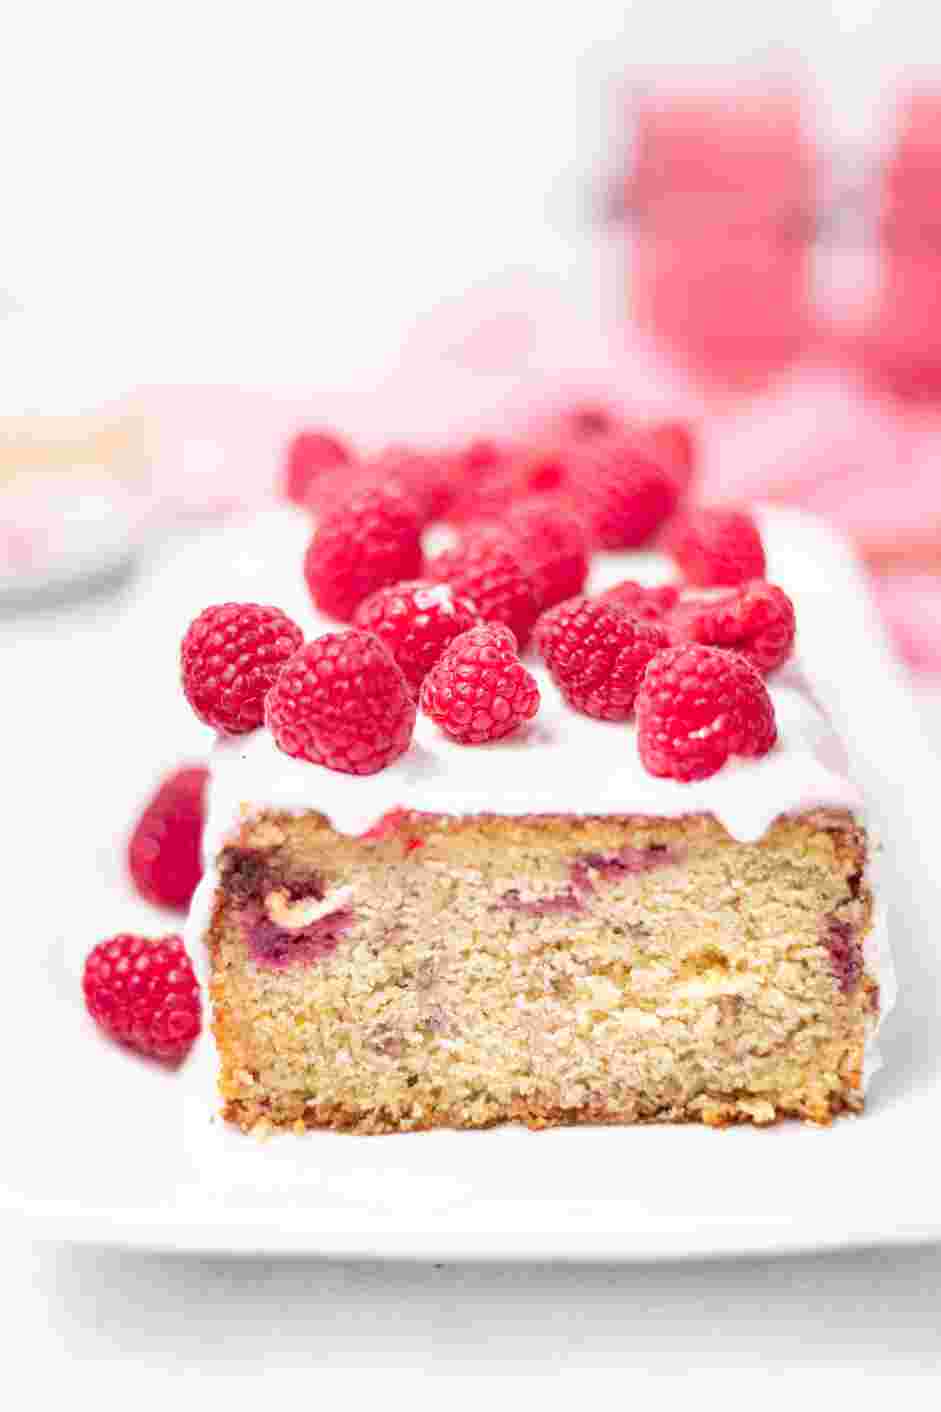 Raspberry Cake Recipe: Pour the glaze over the cooled cake and refrigerate for 30 minutes.